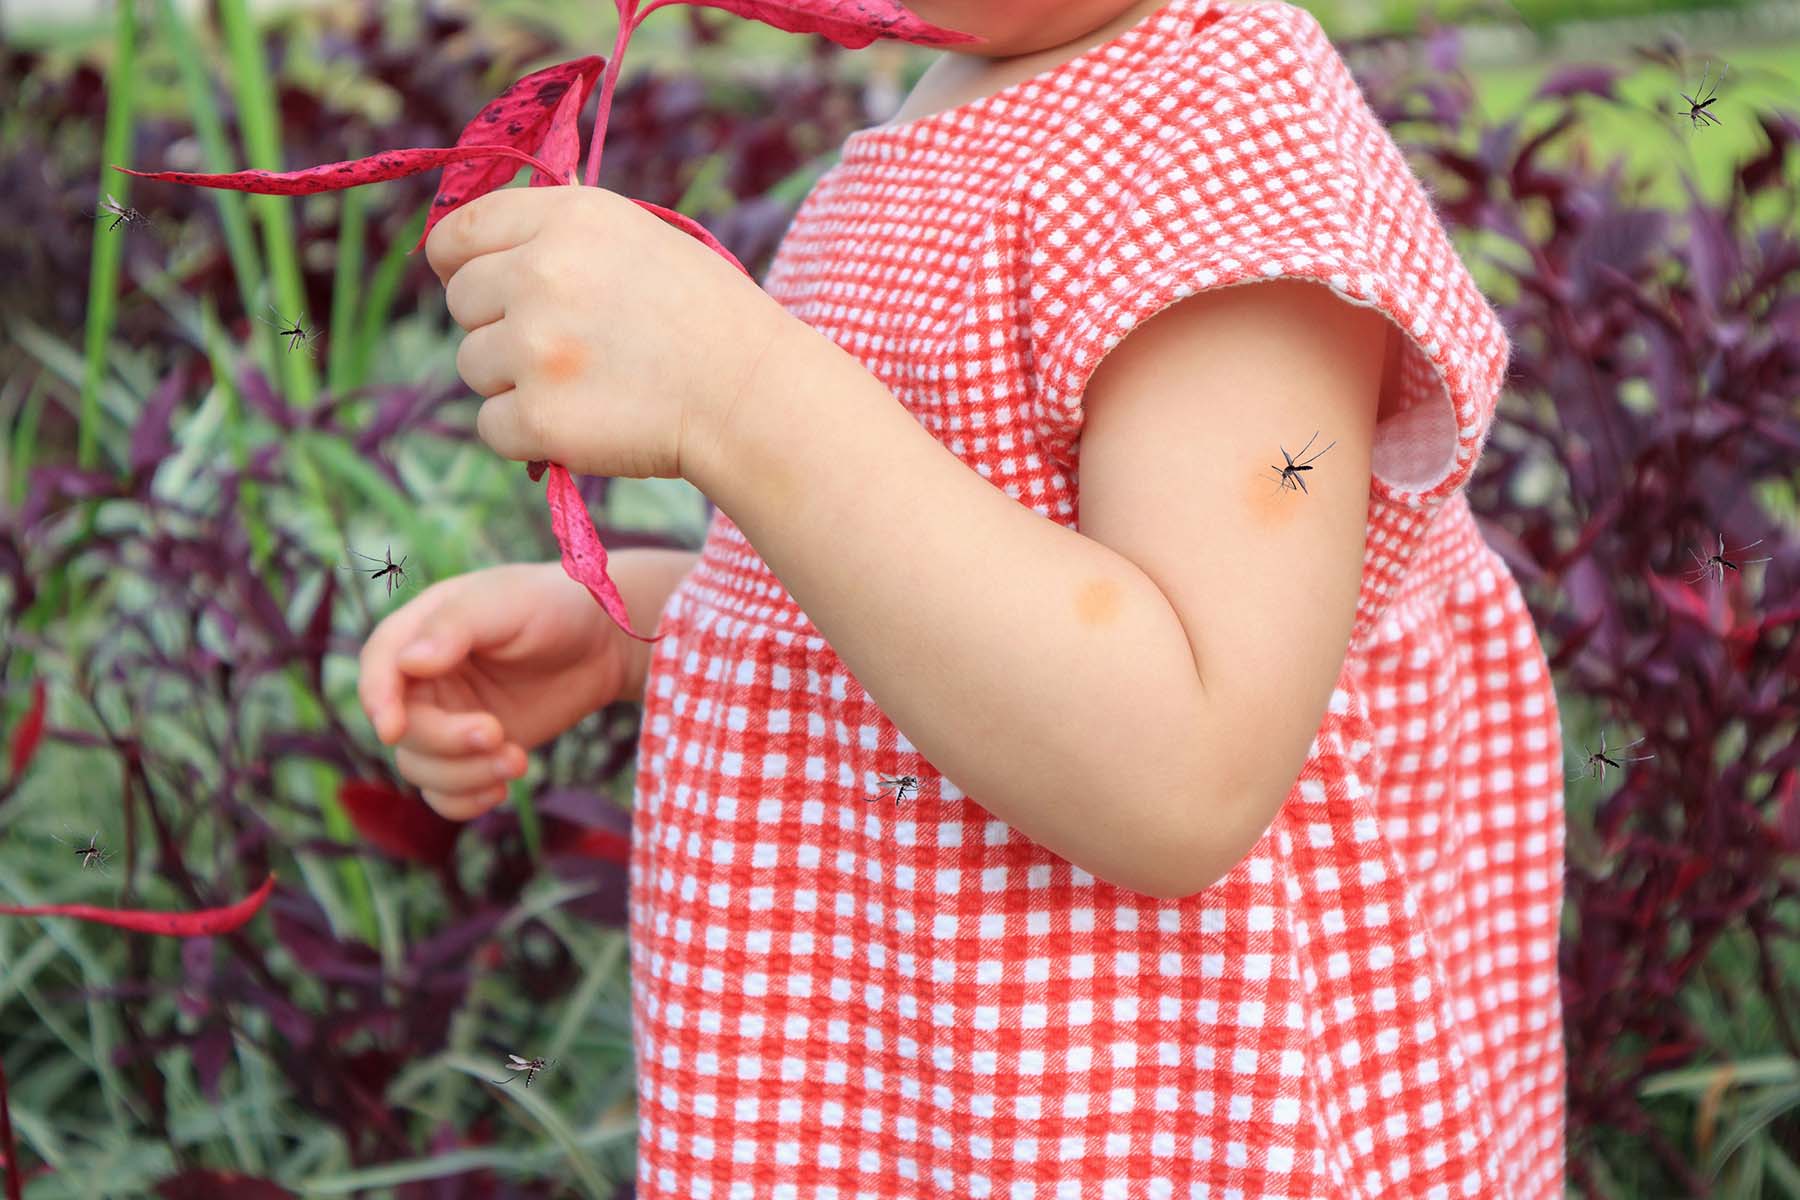 Little girl getting bit by mosquito